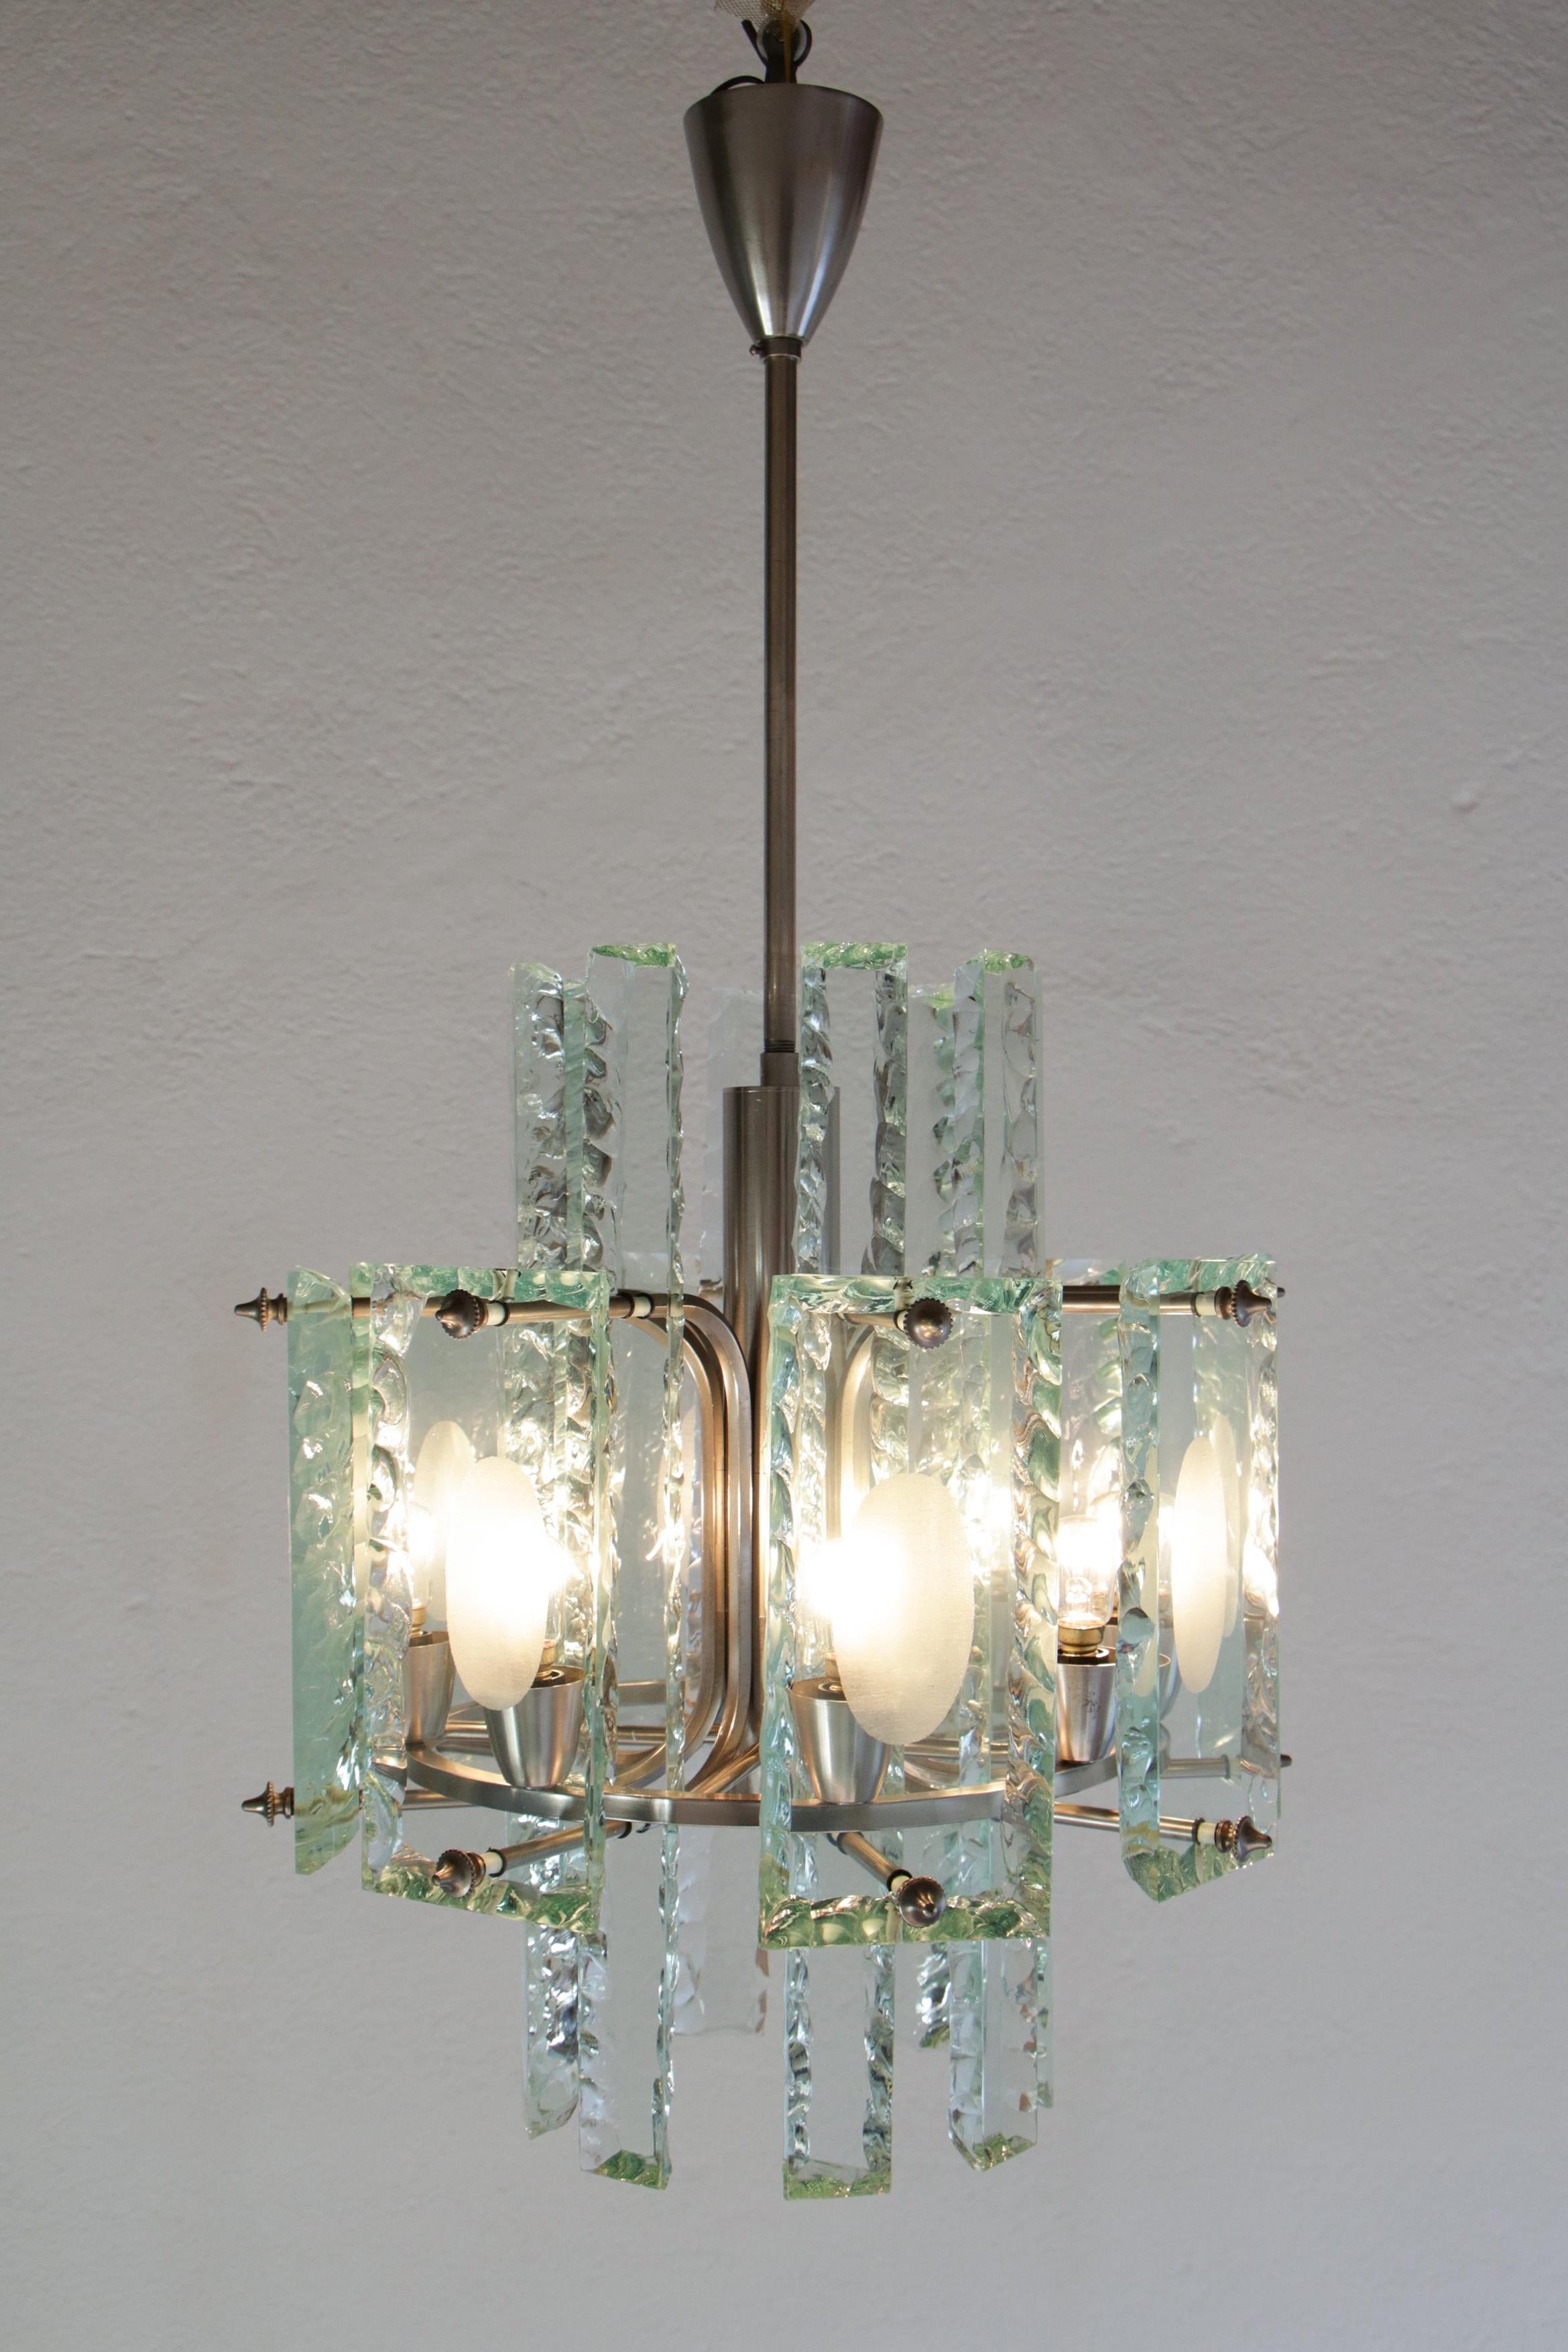 Italian Mid-Century  Chandelier Attributed to Fontana arte  , 1950s In Good Condition For Sale In Traversetolo, IT